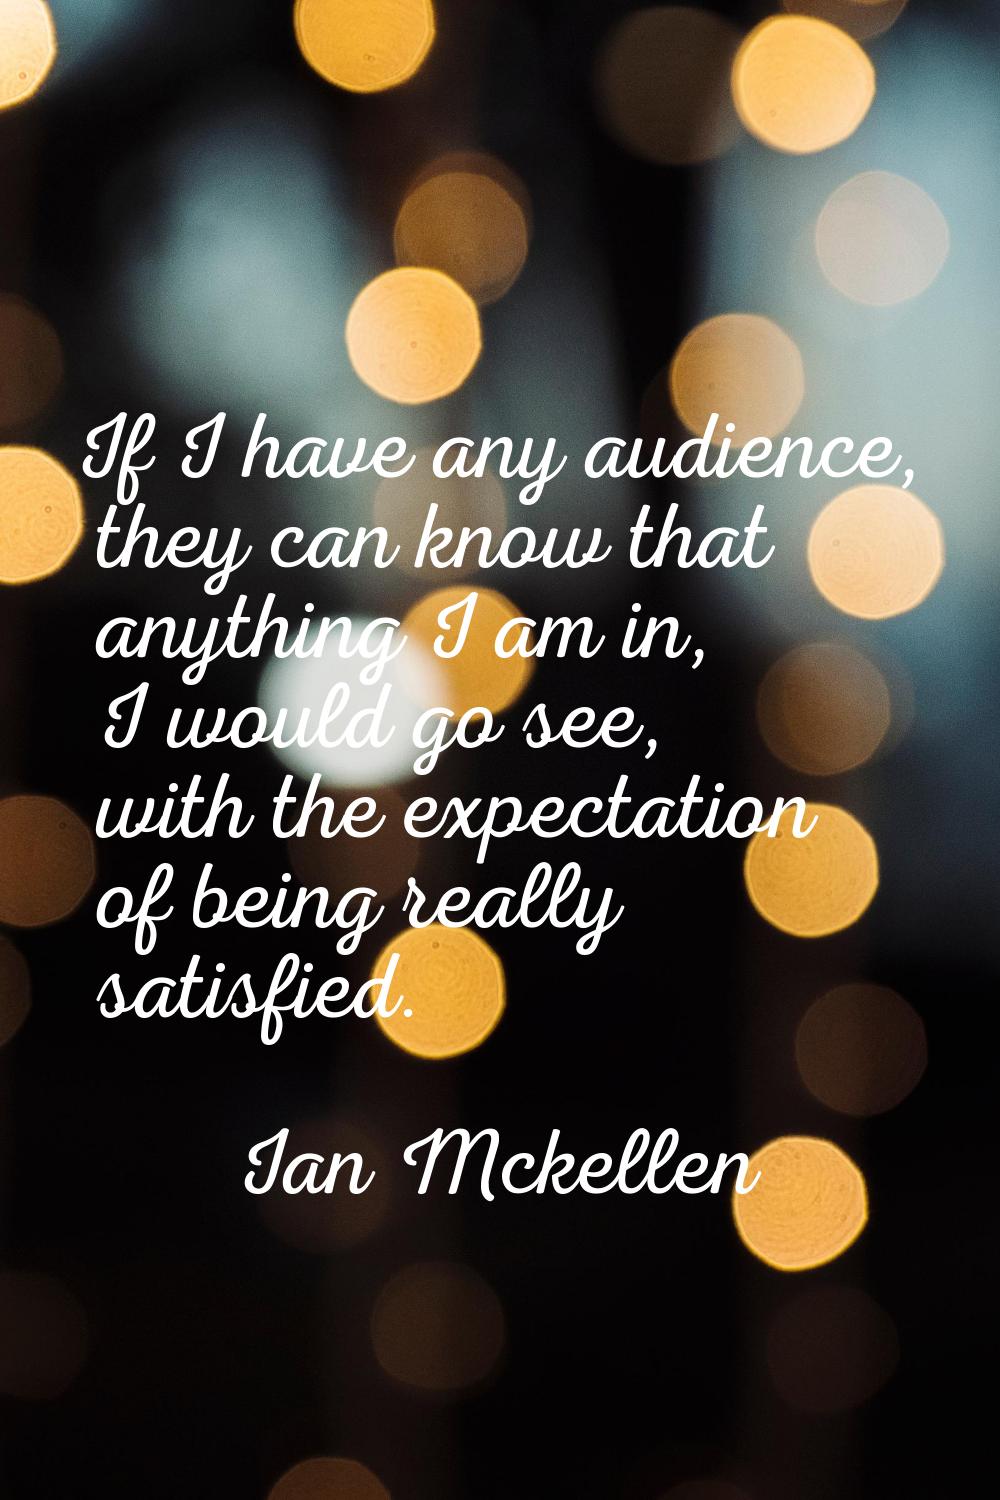 If I have any audience, they can know that anything I am in, I would go see, with the expectation o